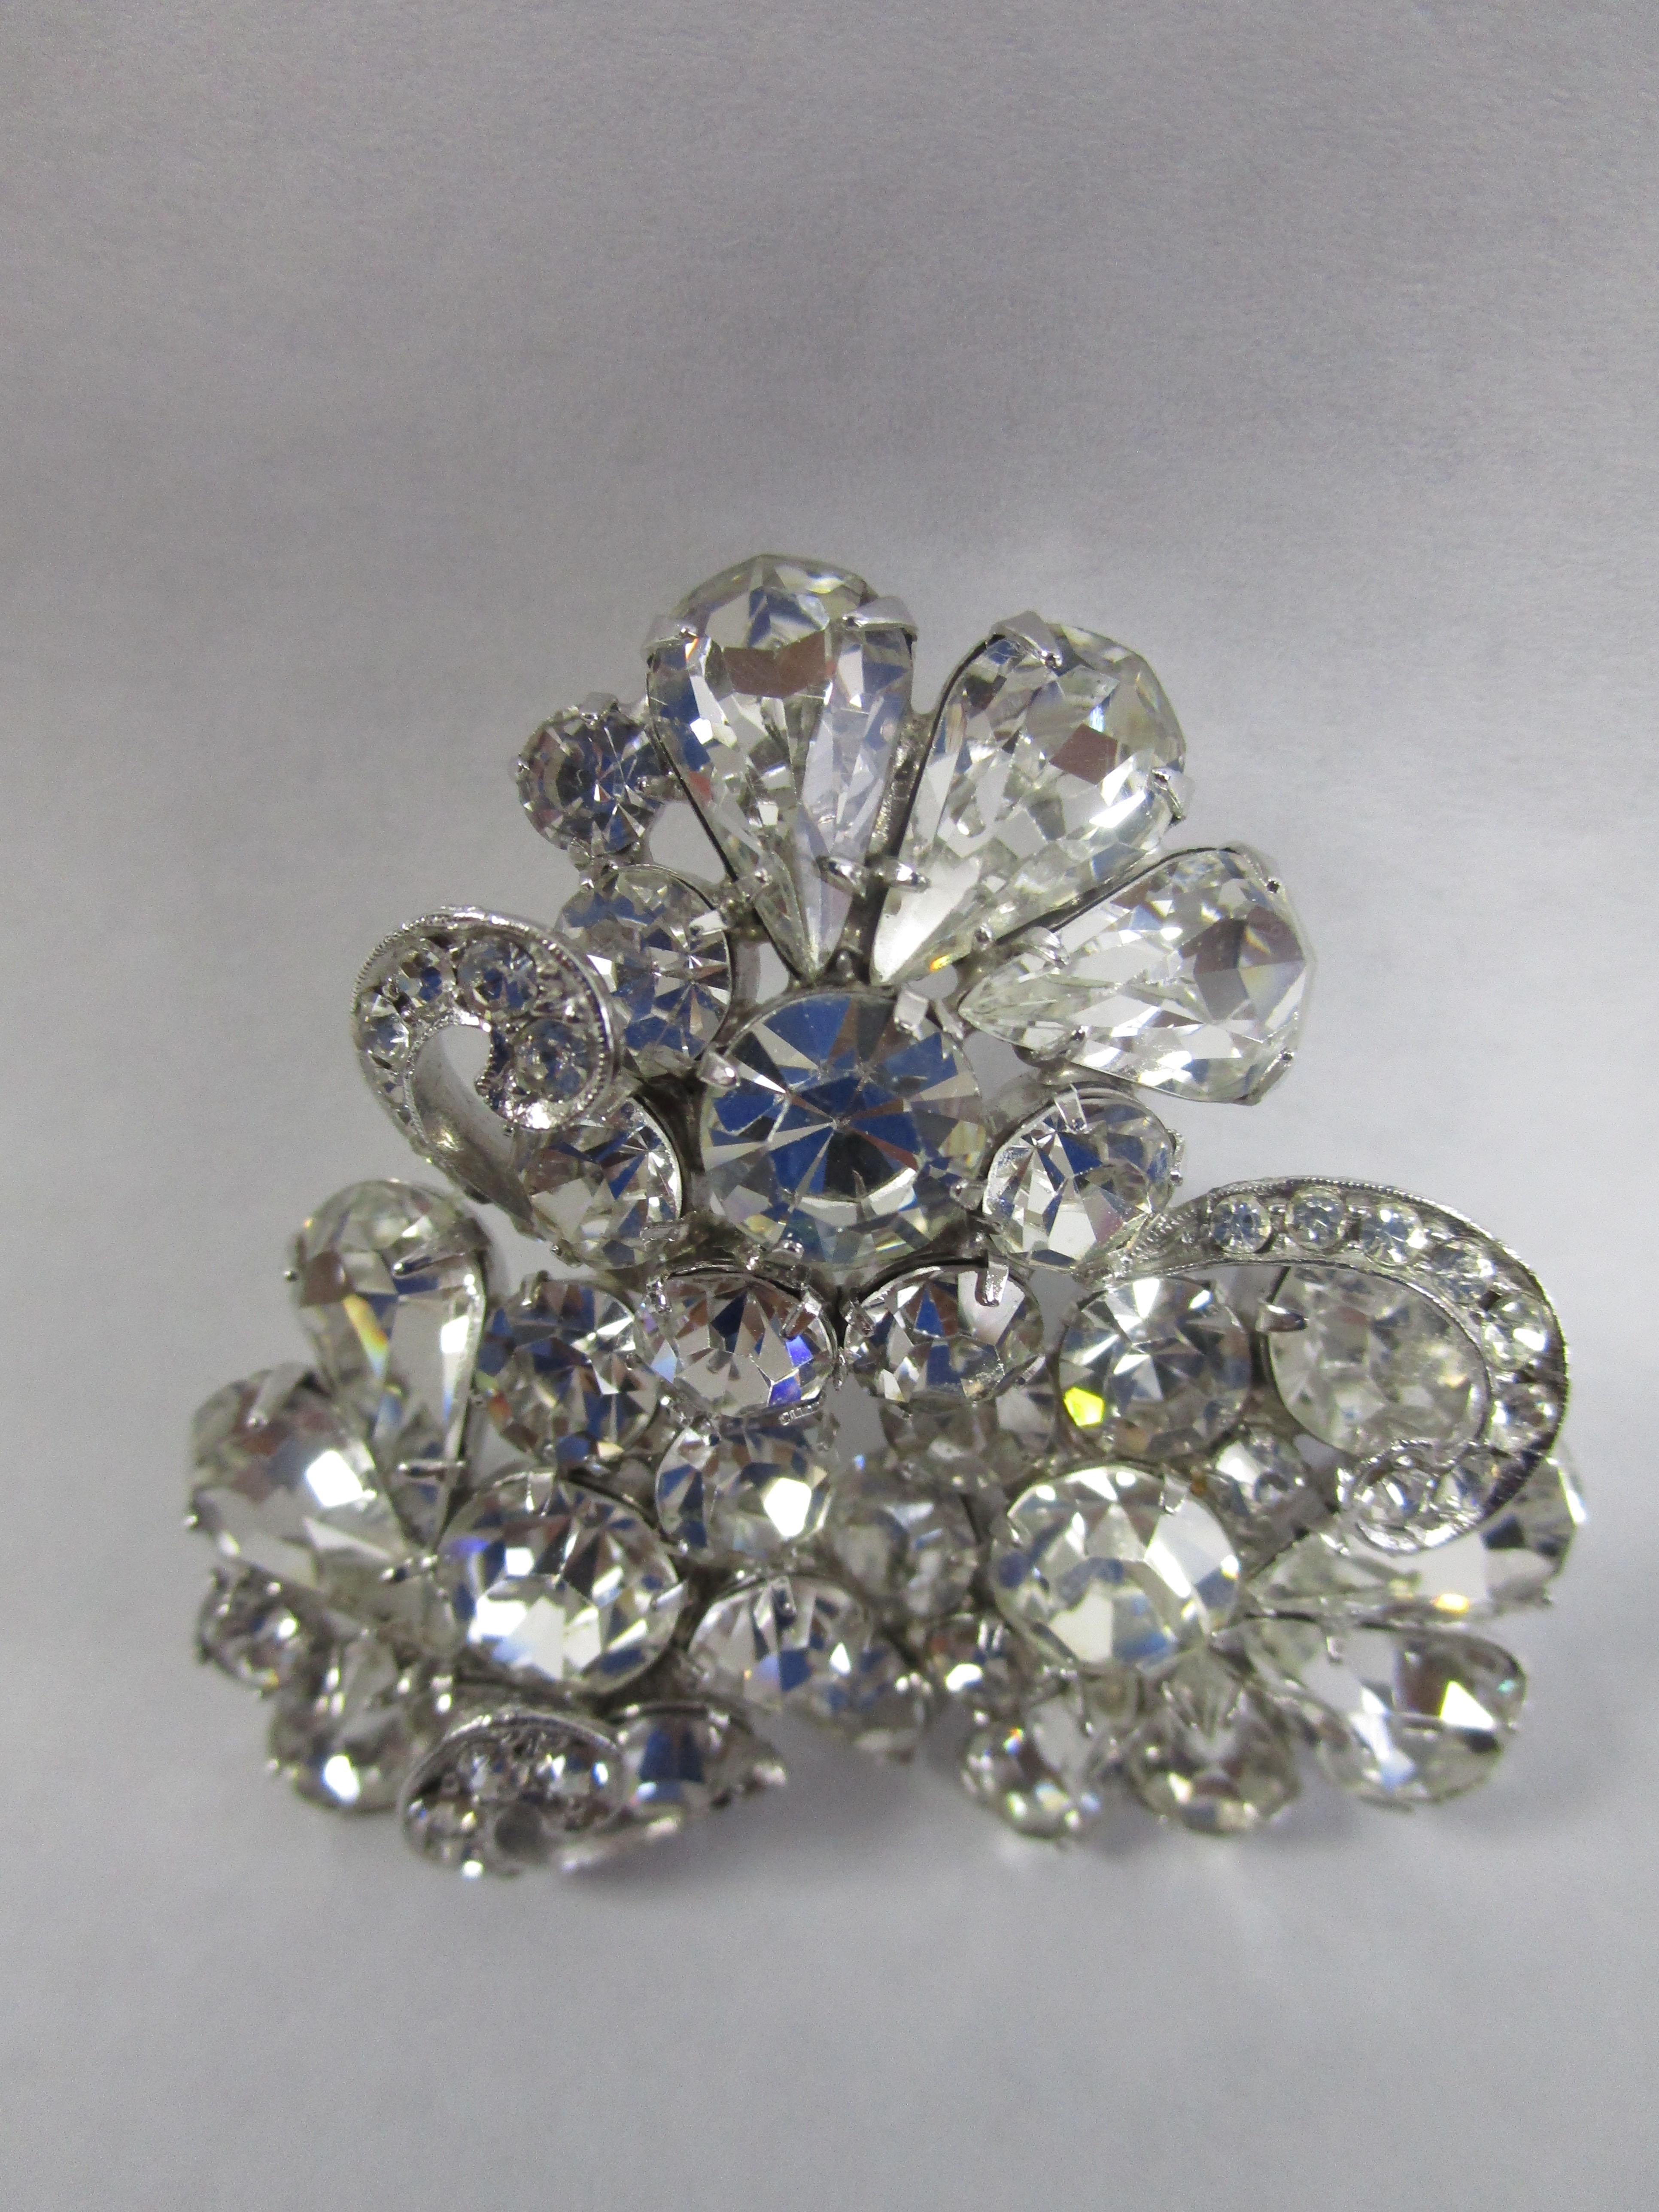 Weiss Swirled Tri Cluster Clear Crystal Brooch. Take a look at this large artfully made brooch from Weiss!
It features three clusters of rhinestones in various cuts and is a perfect sparkling addition to any outfit!

Albert Weiss started his own